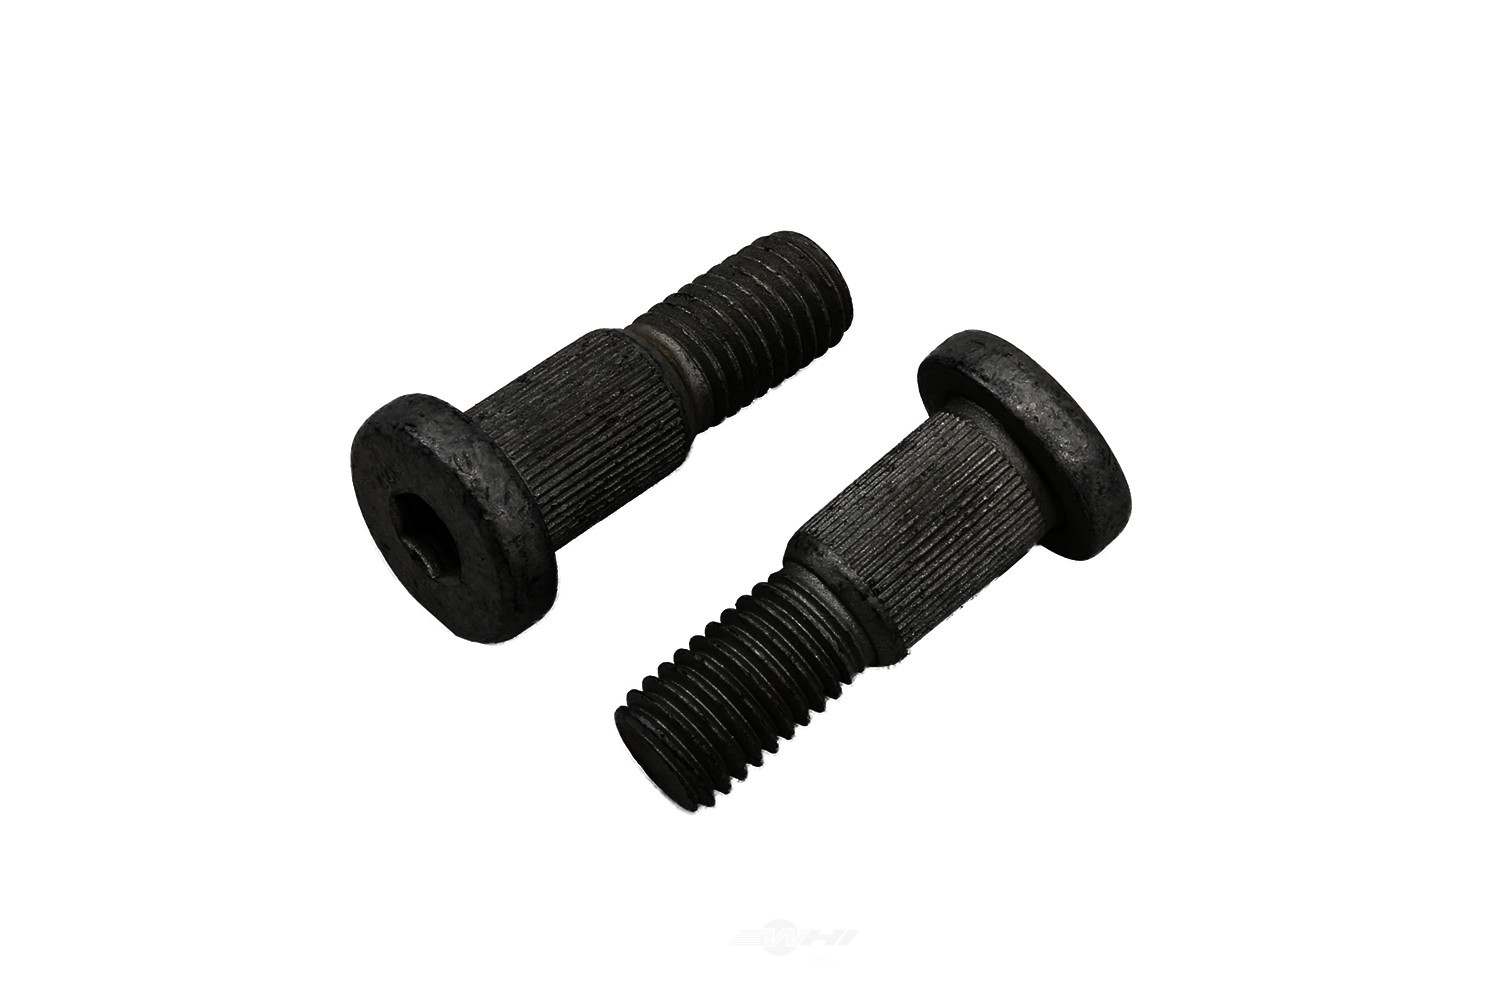 GM GENUINE PARTS - Steering King Pin Cap Bolt - GMP 13278765